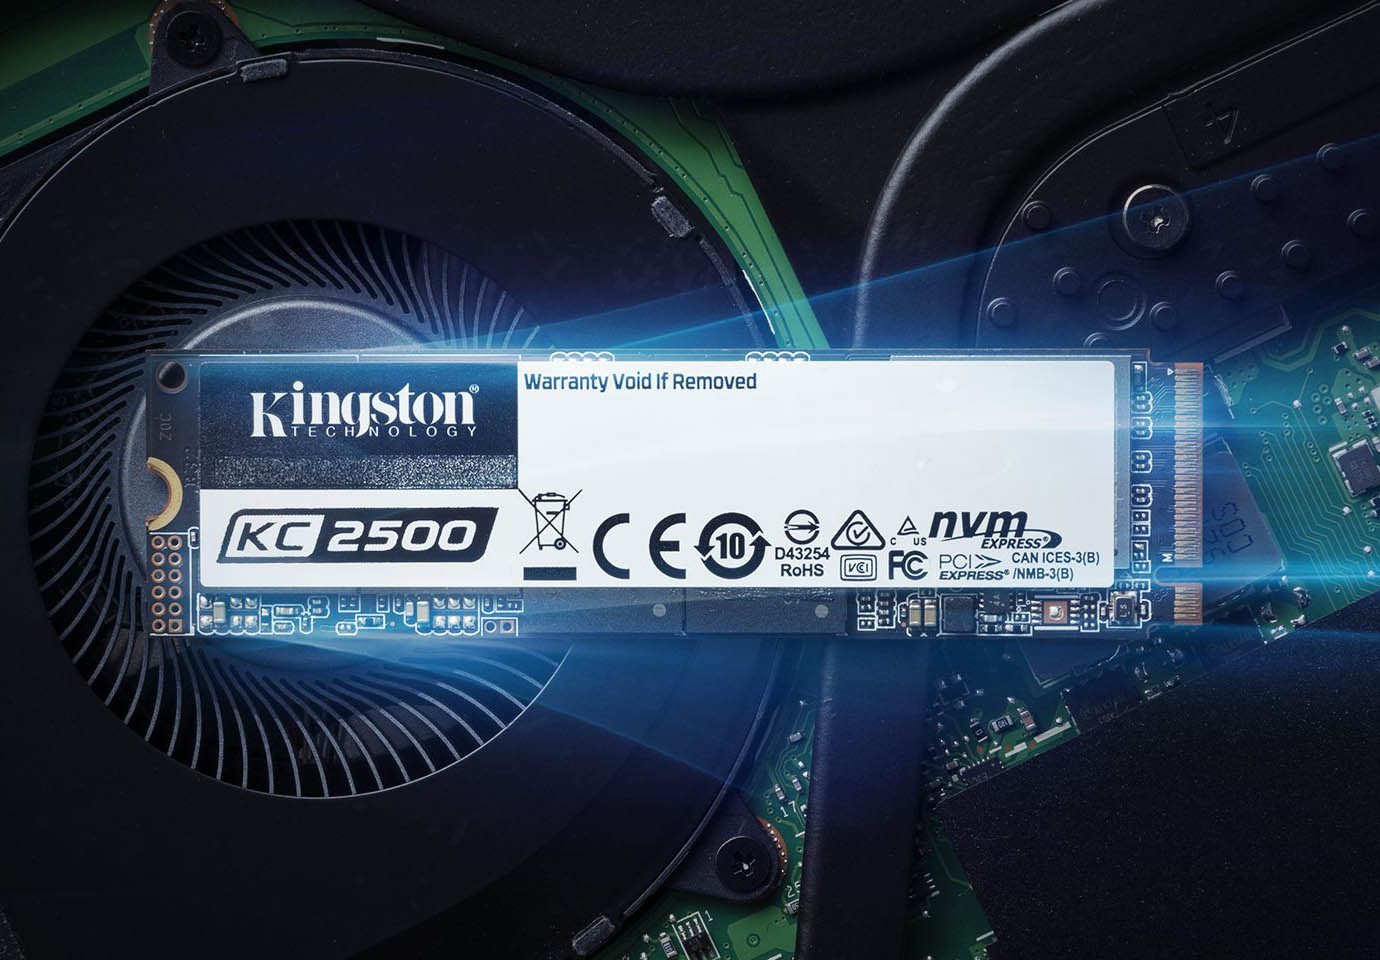 Kingston launches next-gen KC2500 NVMe PCIe SSD in the Philippines